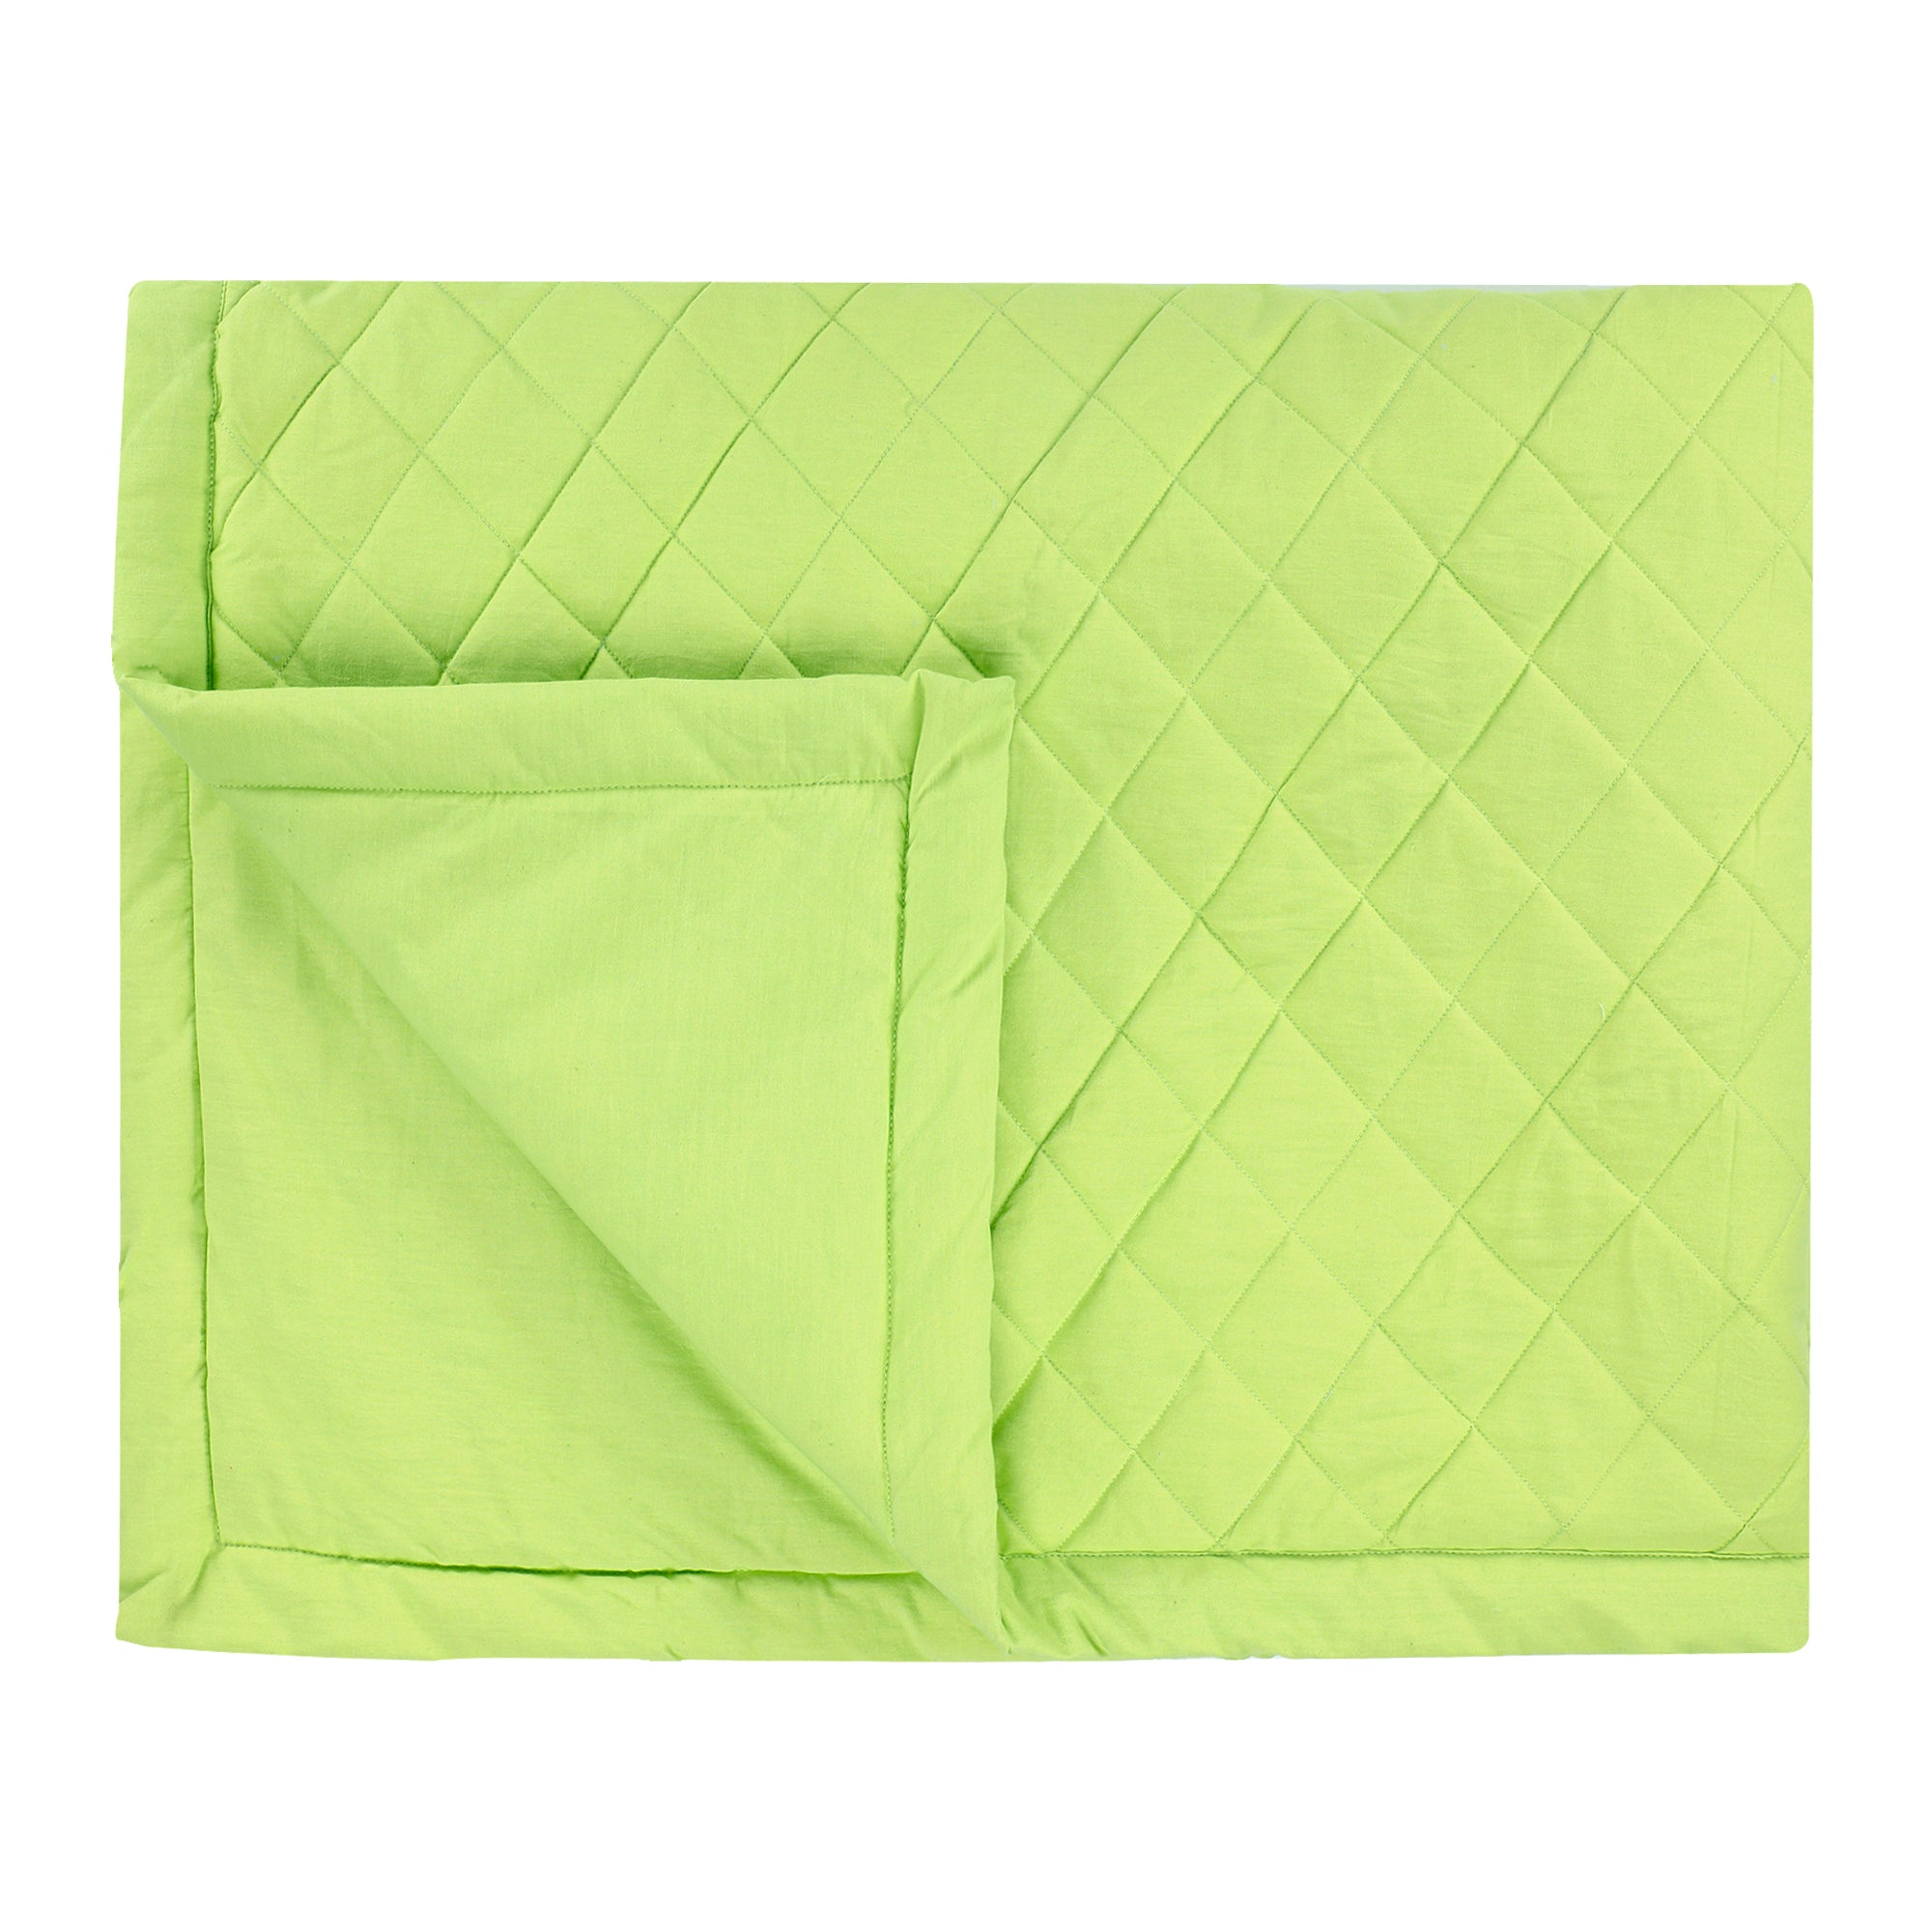 SHADOW LIME QUILT